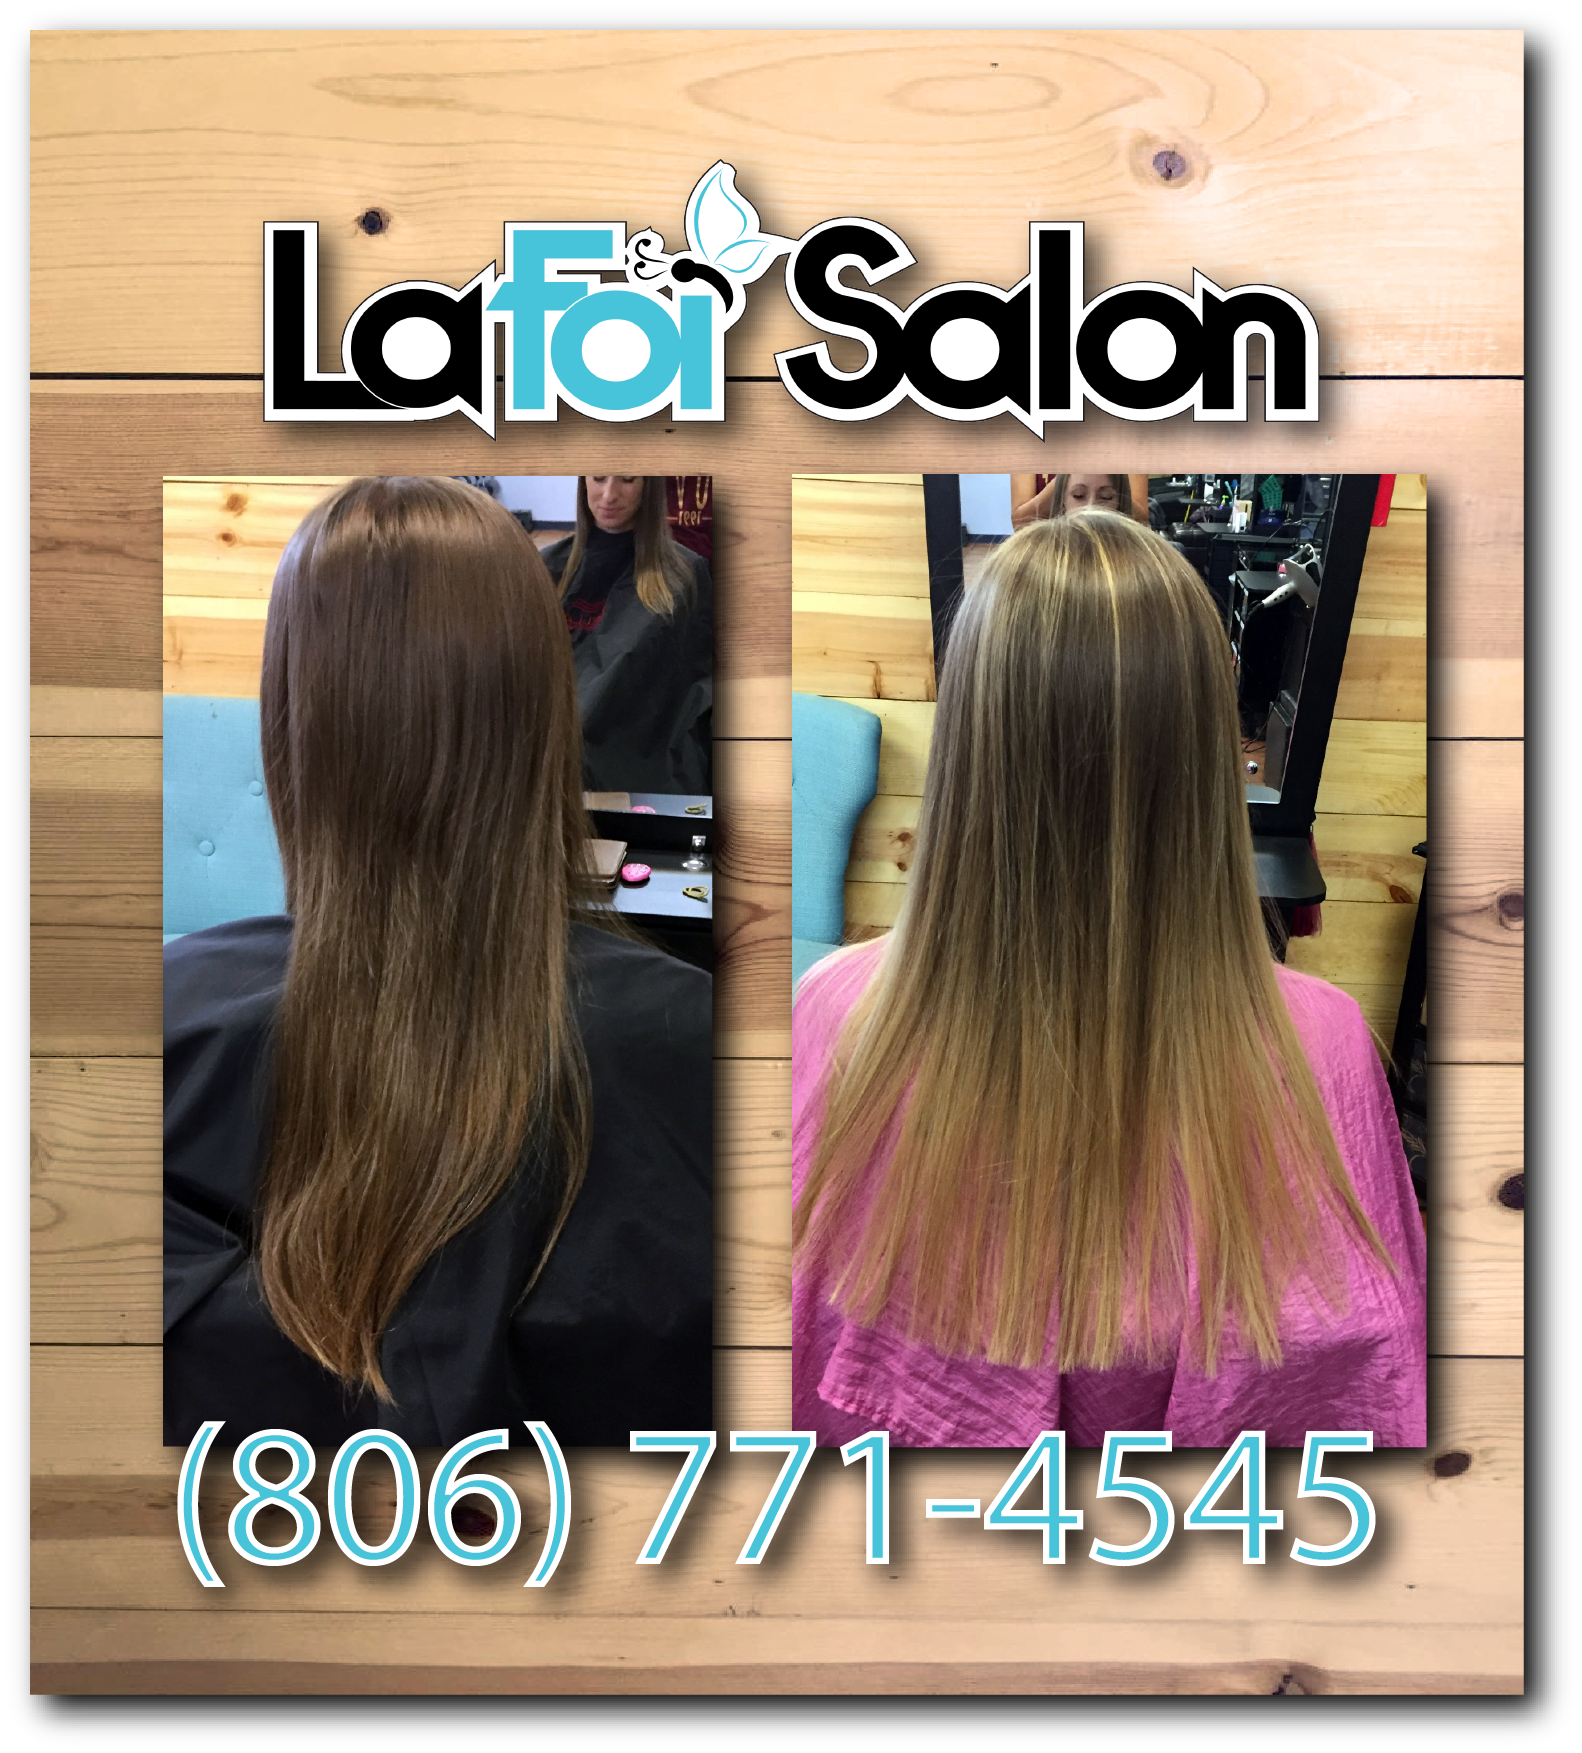 Bring Life Back To Your Hair!!! Call For Your Next Appointment Today! (806)771-4545 www.lafoisalon.com